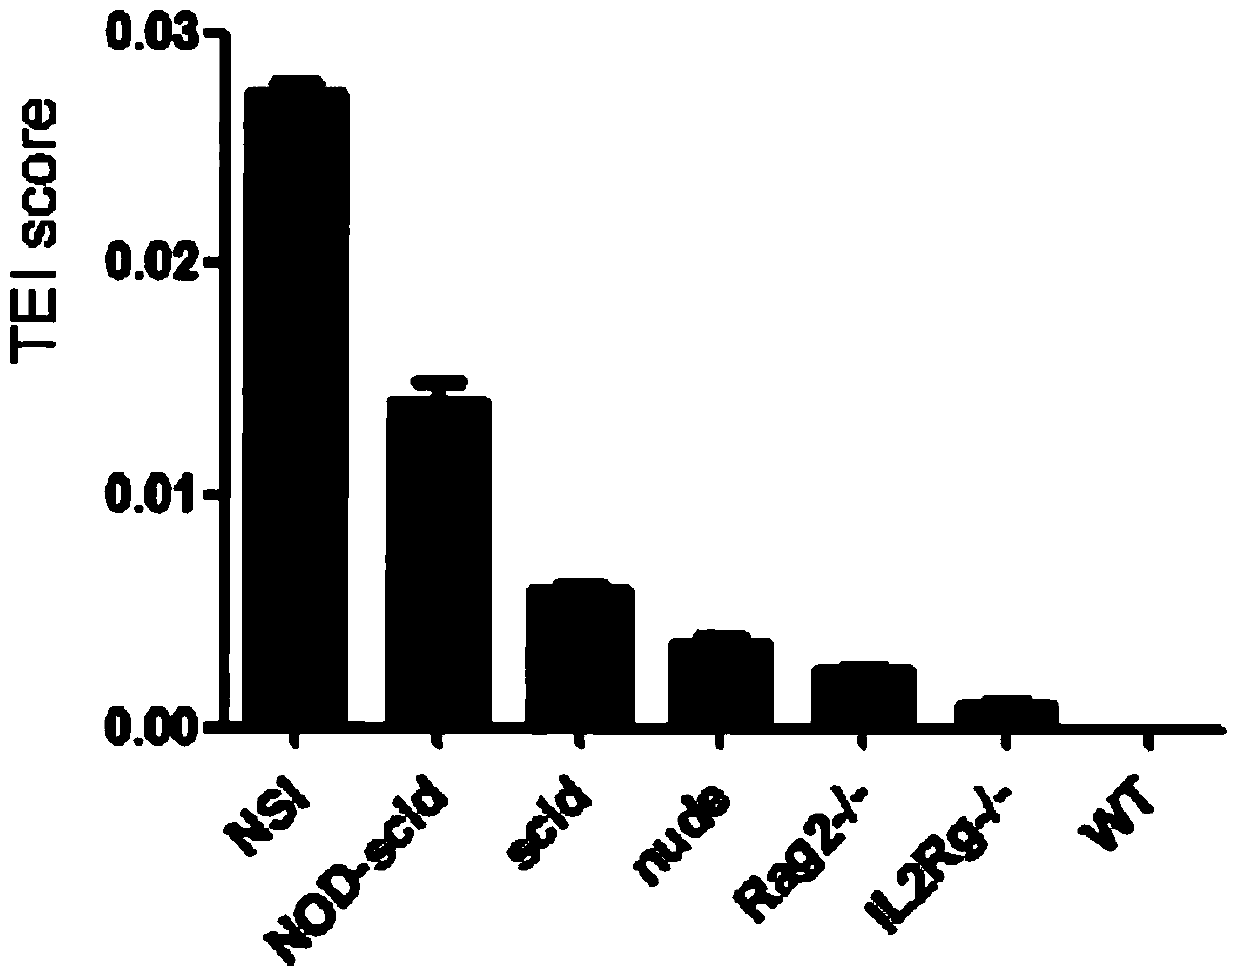 A method for evaluating the degree of immunodeficiency in an immunodeficiency mouse model